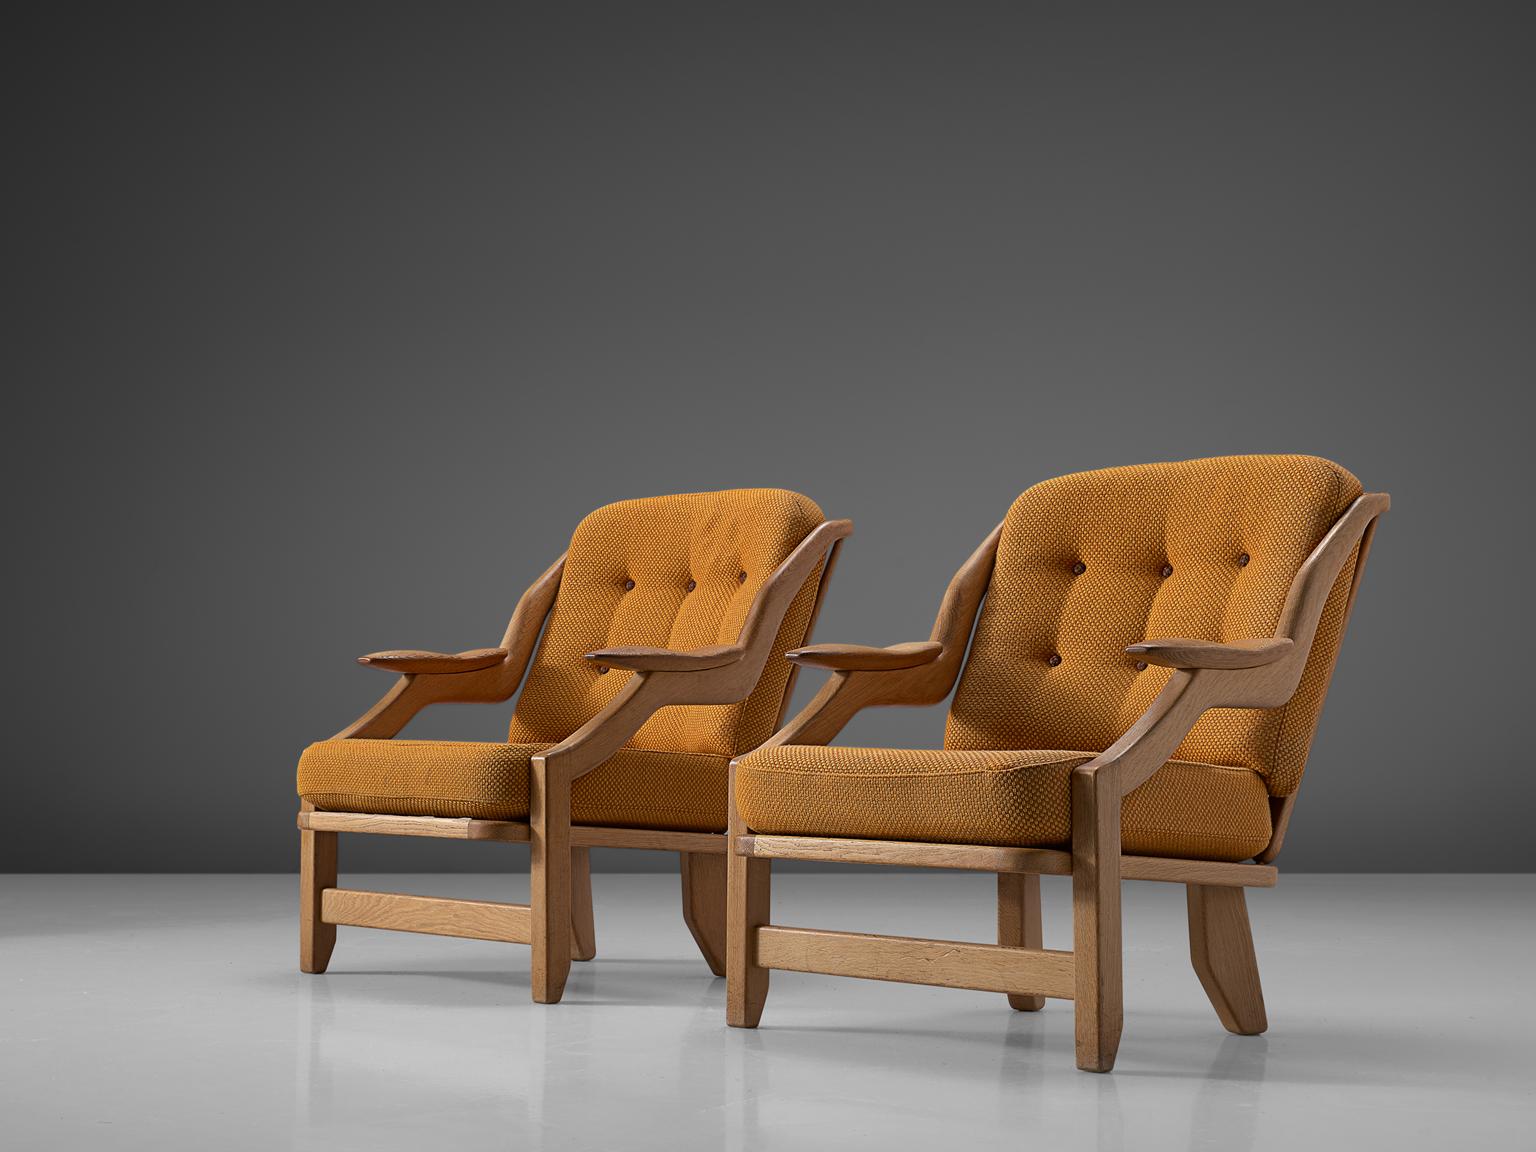 Guillerme and Chambron, pair of lounge chairs, orange fabric and oak, France, 1950s. 

This French designer duo is known for their extreme high quality solid oak furniture, from which this orange set is another great example. These chairs have a